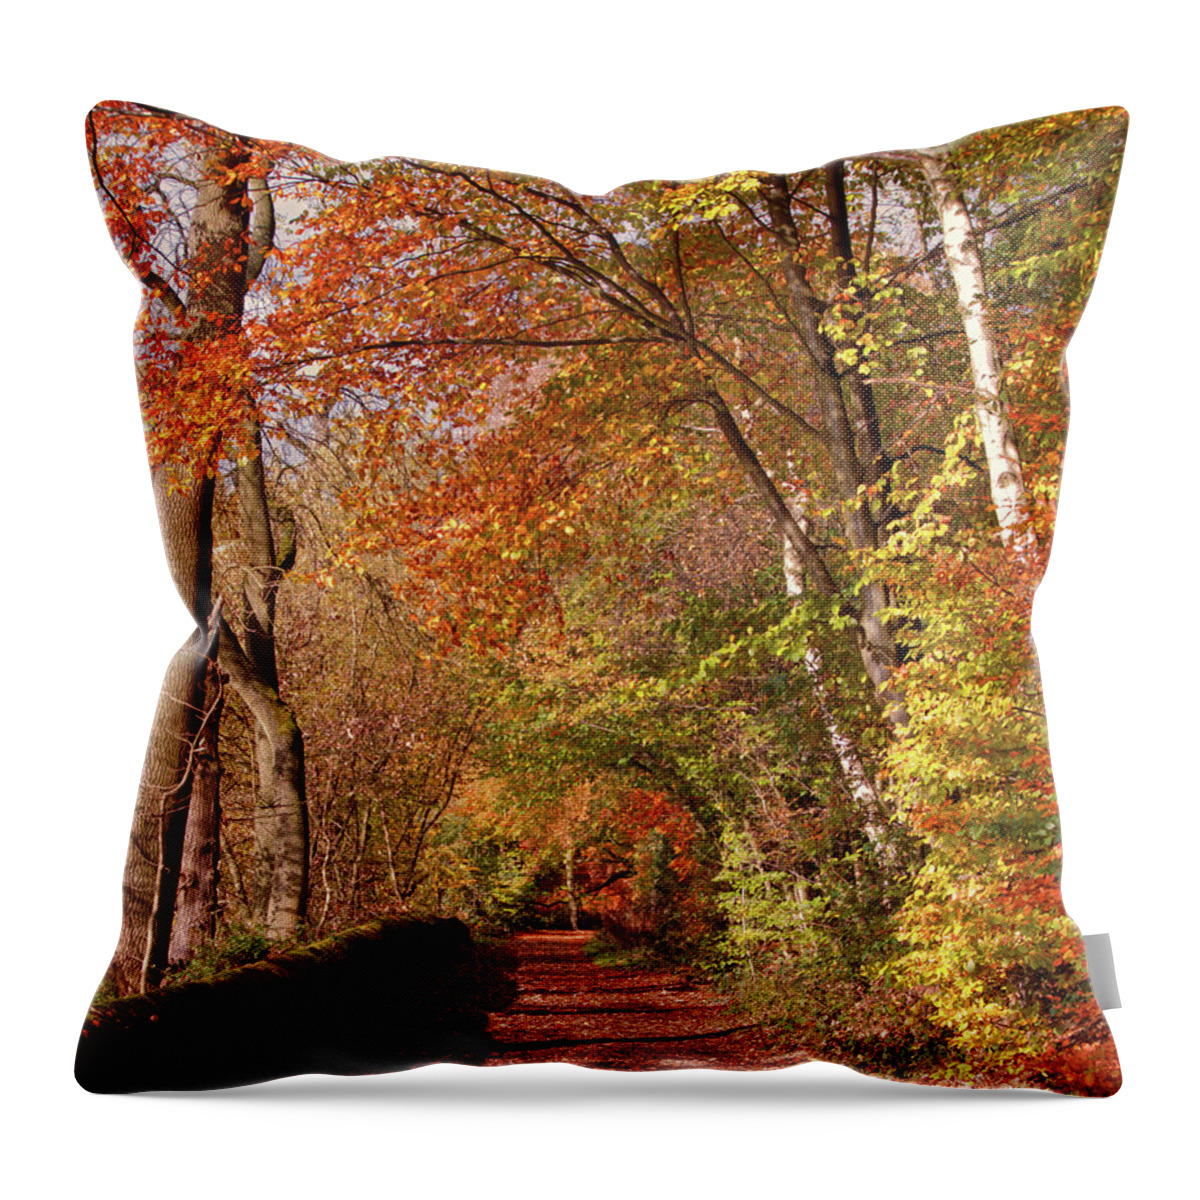 Knypersley Throw Pillow featuring the photograph Knypersley in Autumn by Stephen Melia